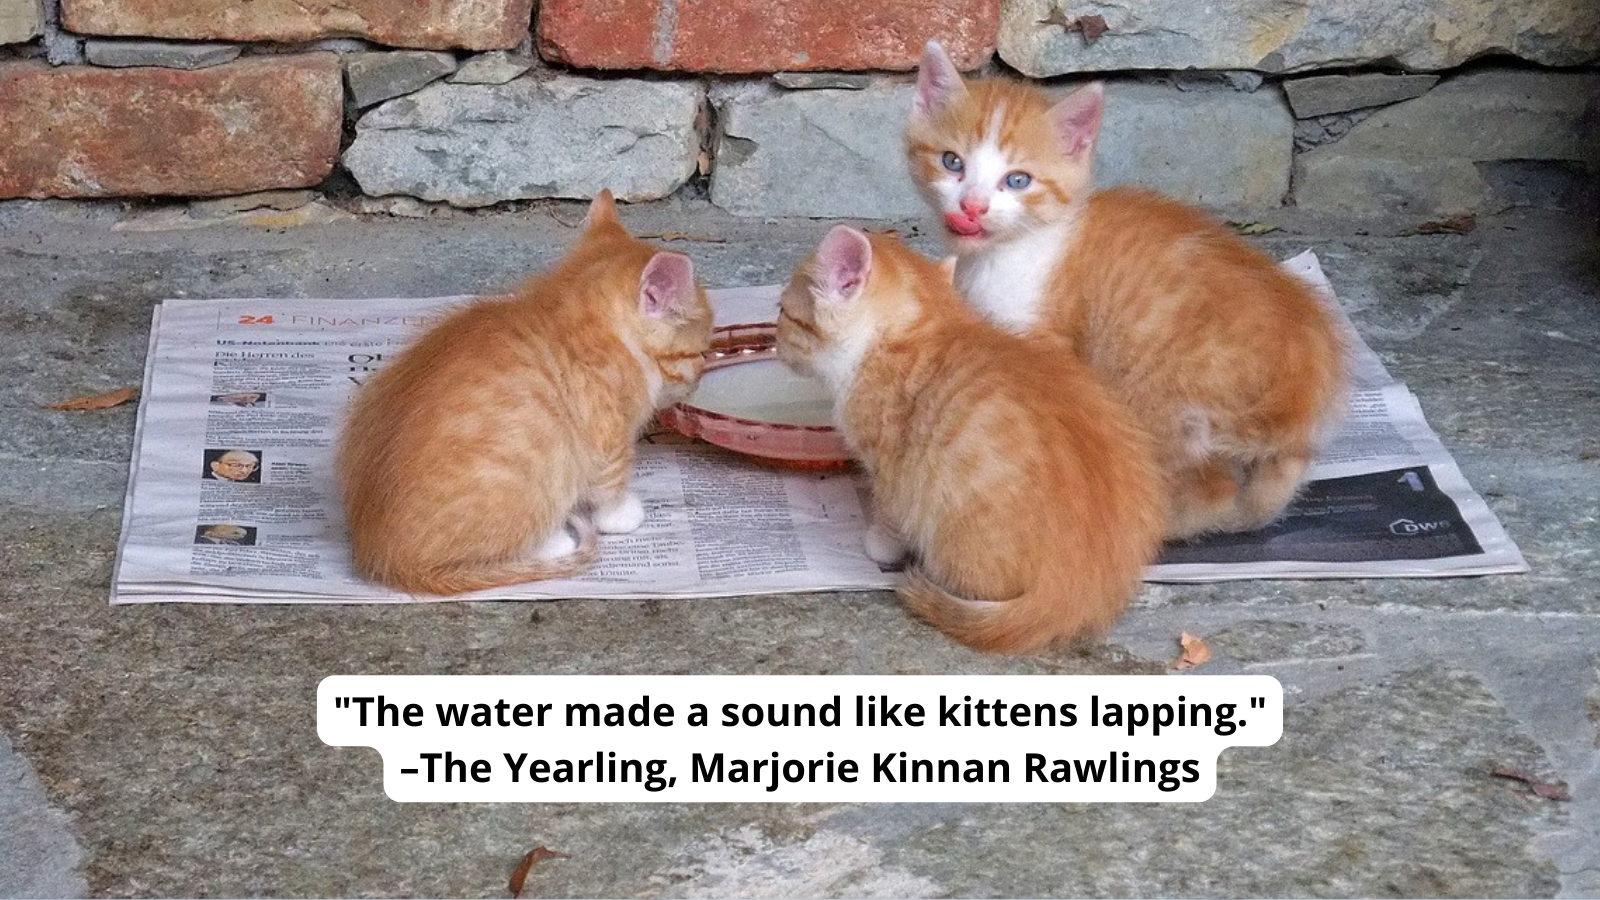 Kittens drinking from a dish with text reading "The water made a sound like kittens lapping." –The Yearling, Marjorie Kinnan Rawlings